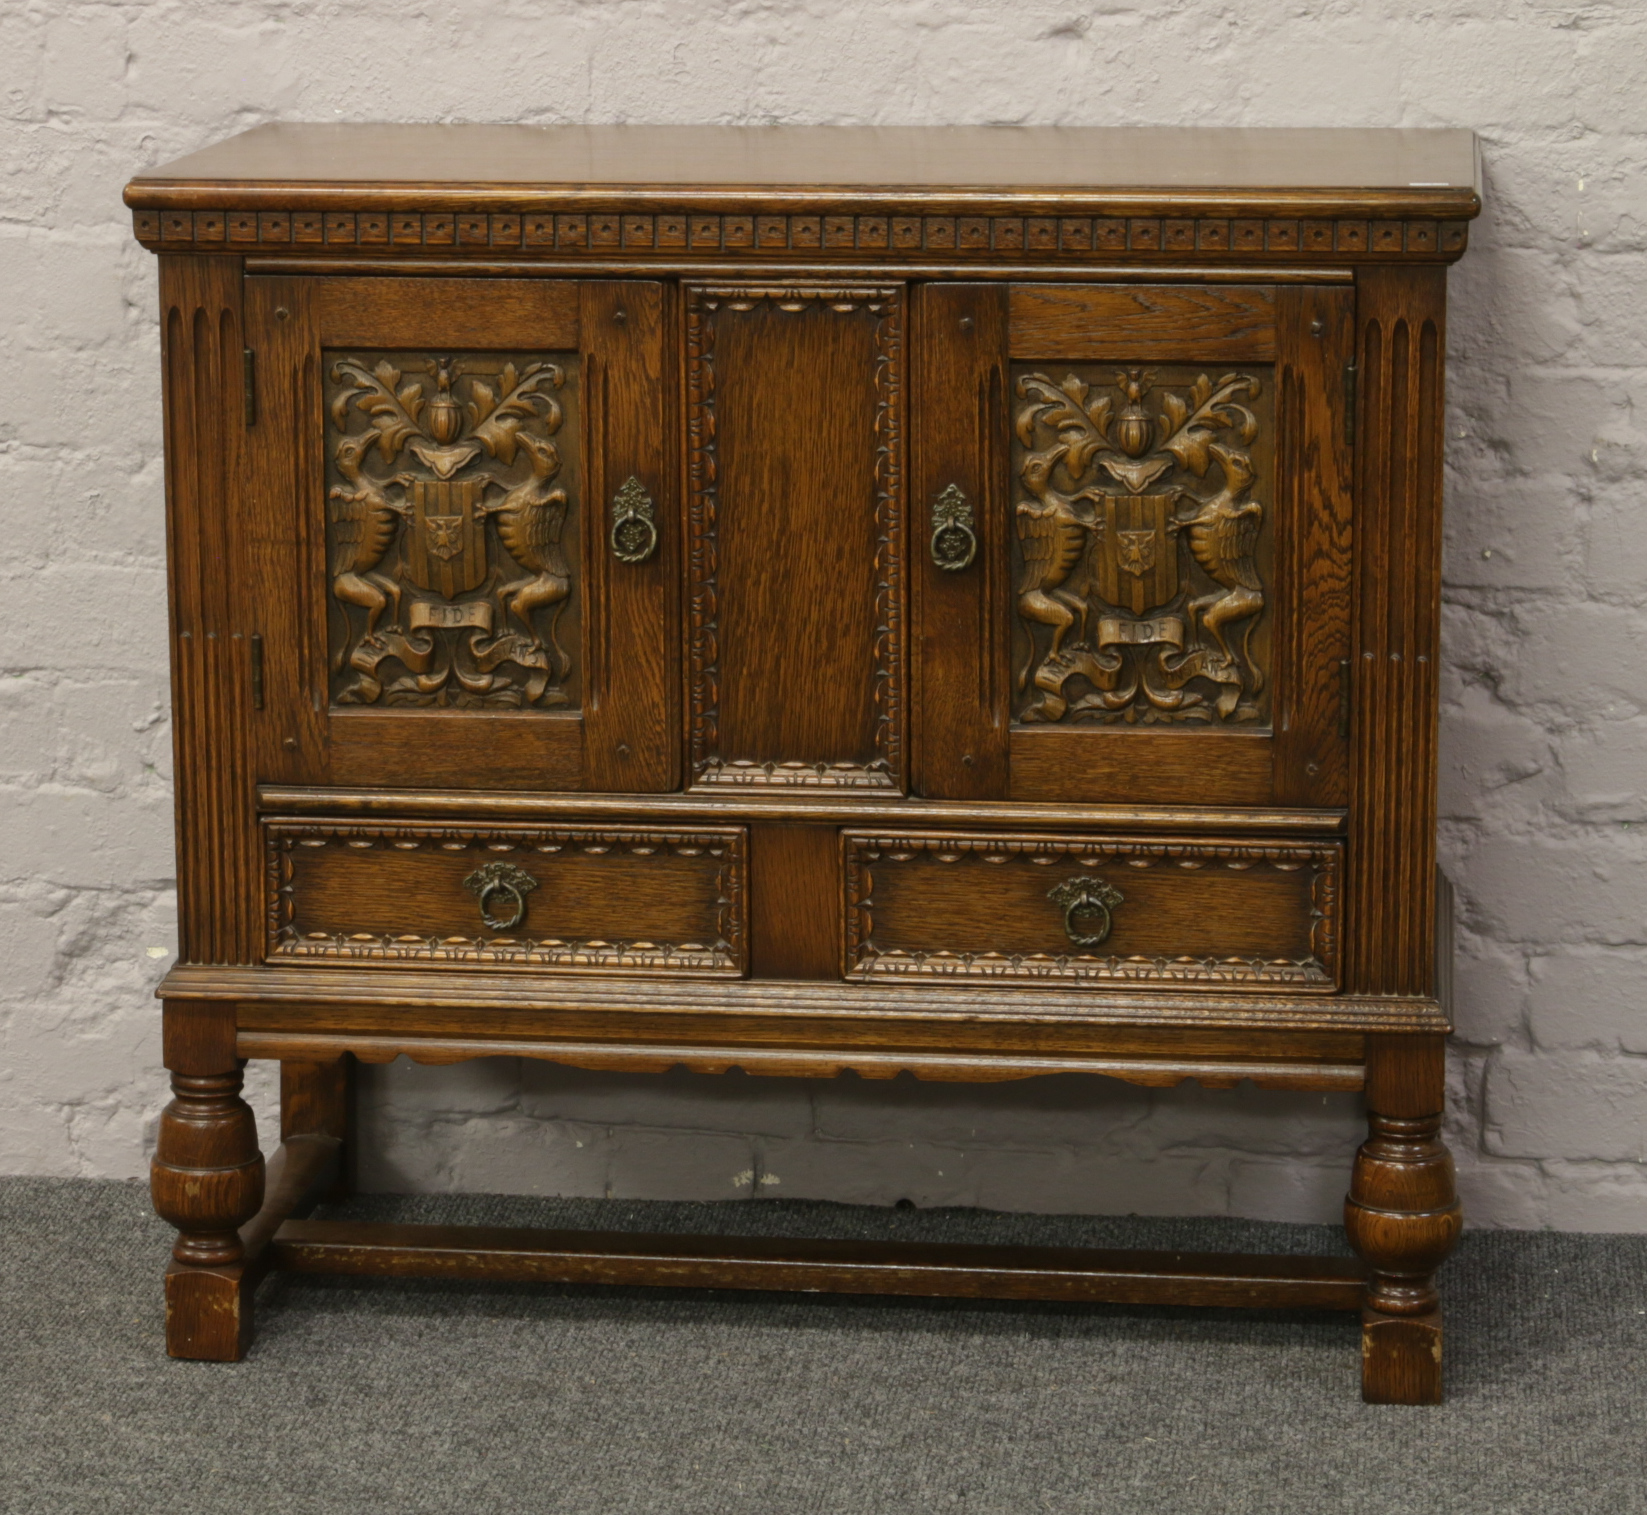 An Old Charm carved oak hutch cupboard with Heraldic panelled doors and raised over a H stretcher.